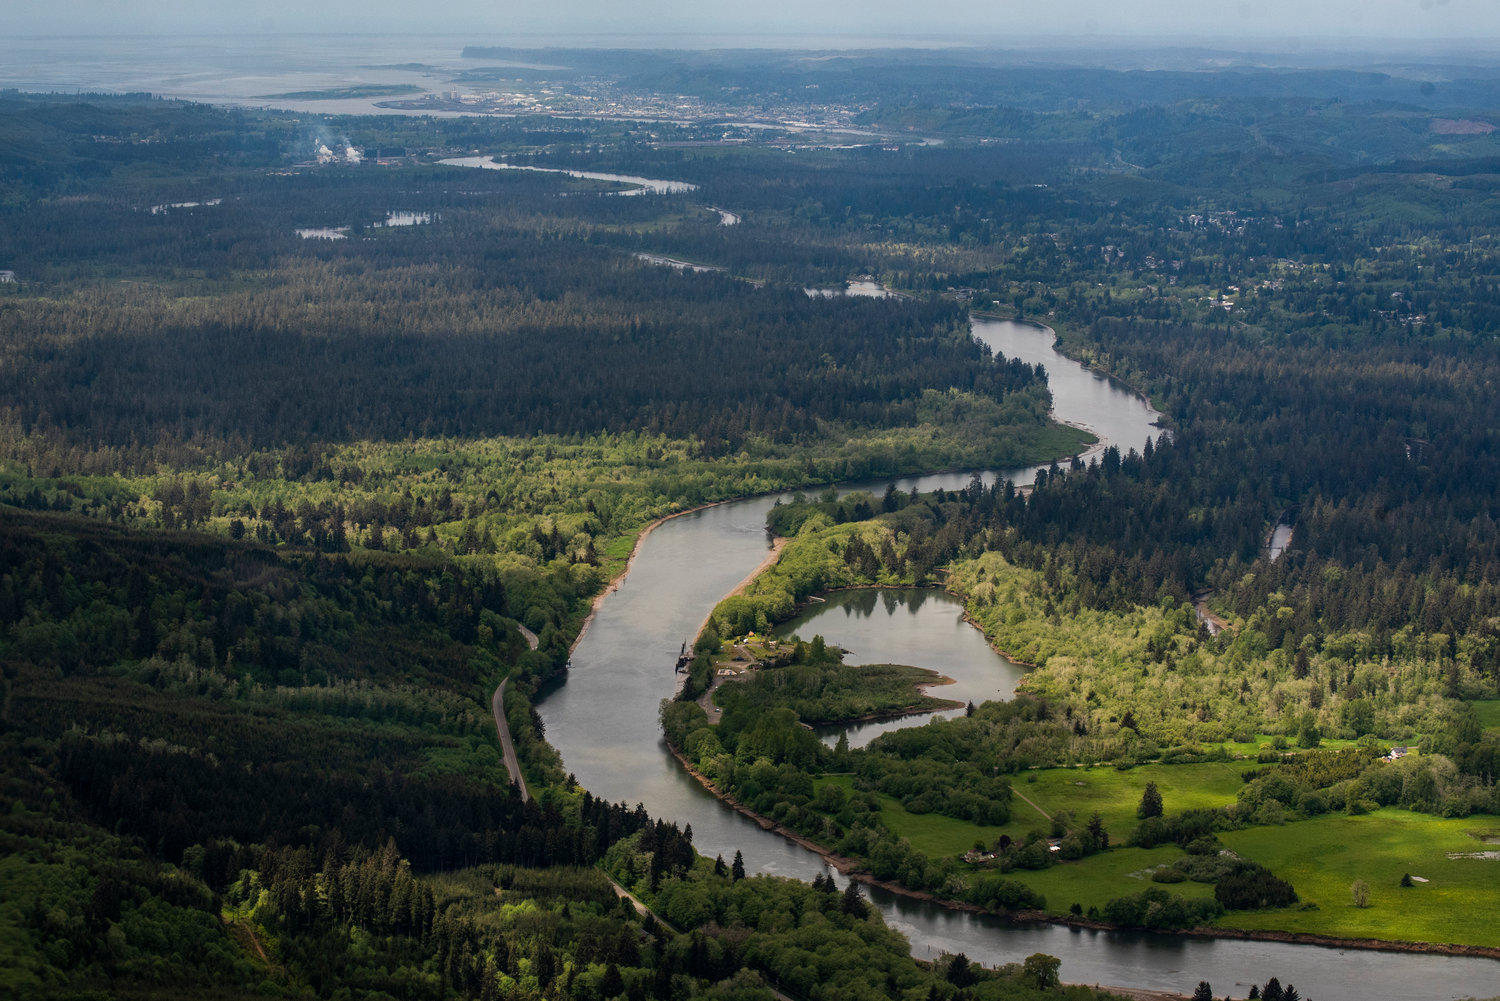 The Chehalis River flows out to Grays Harbor.